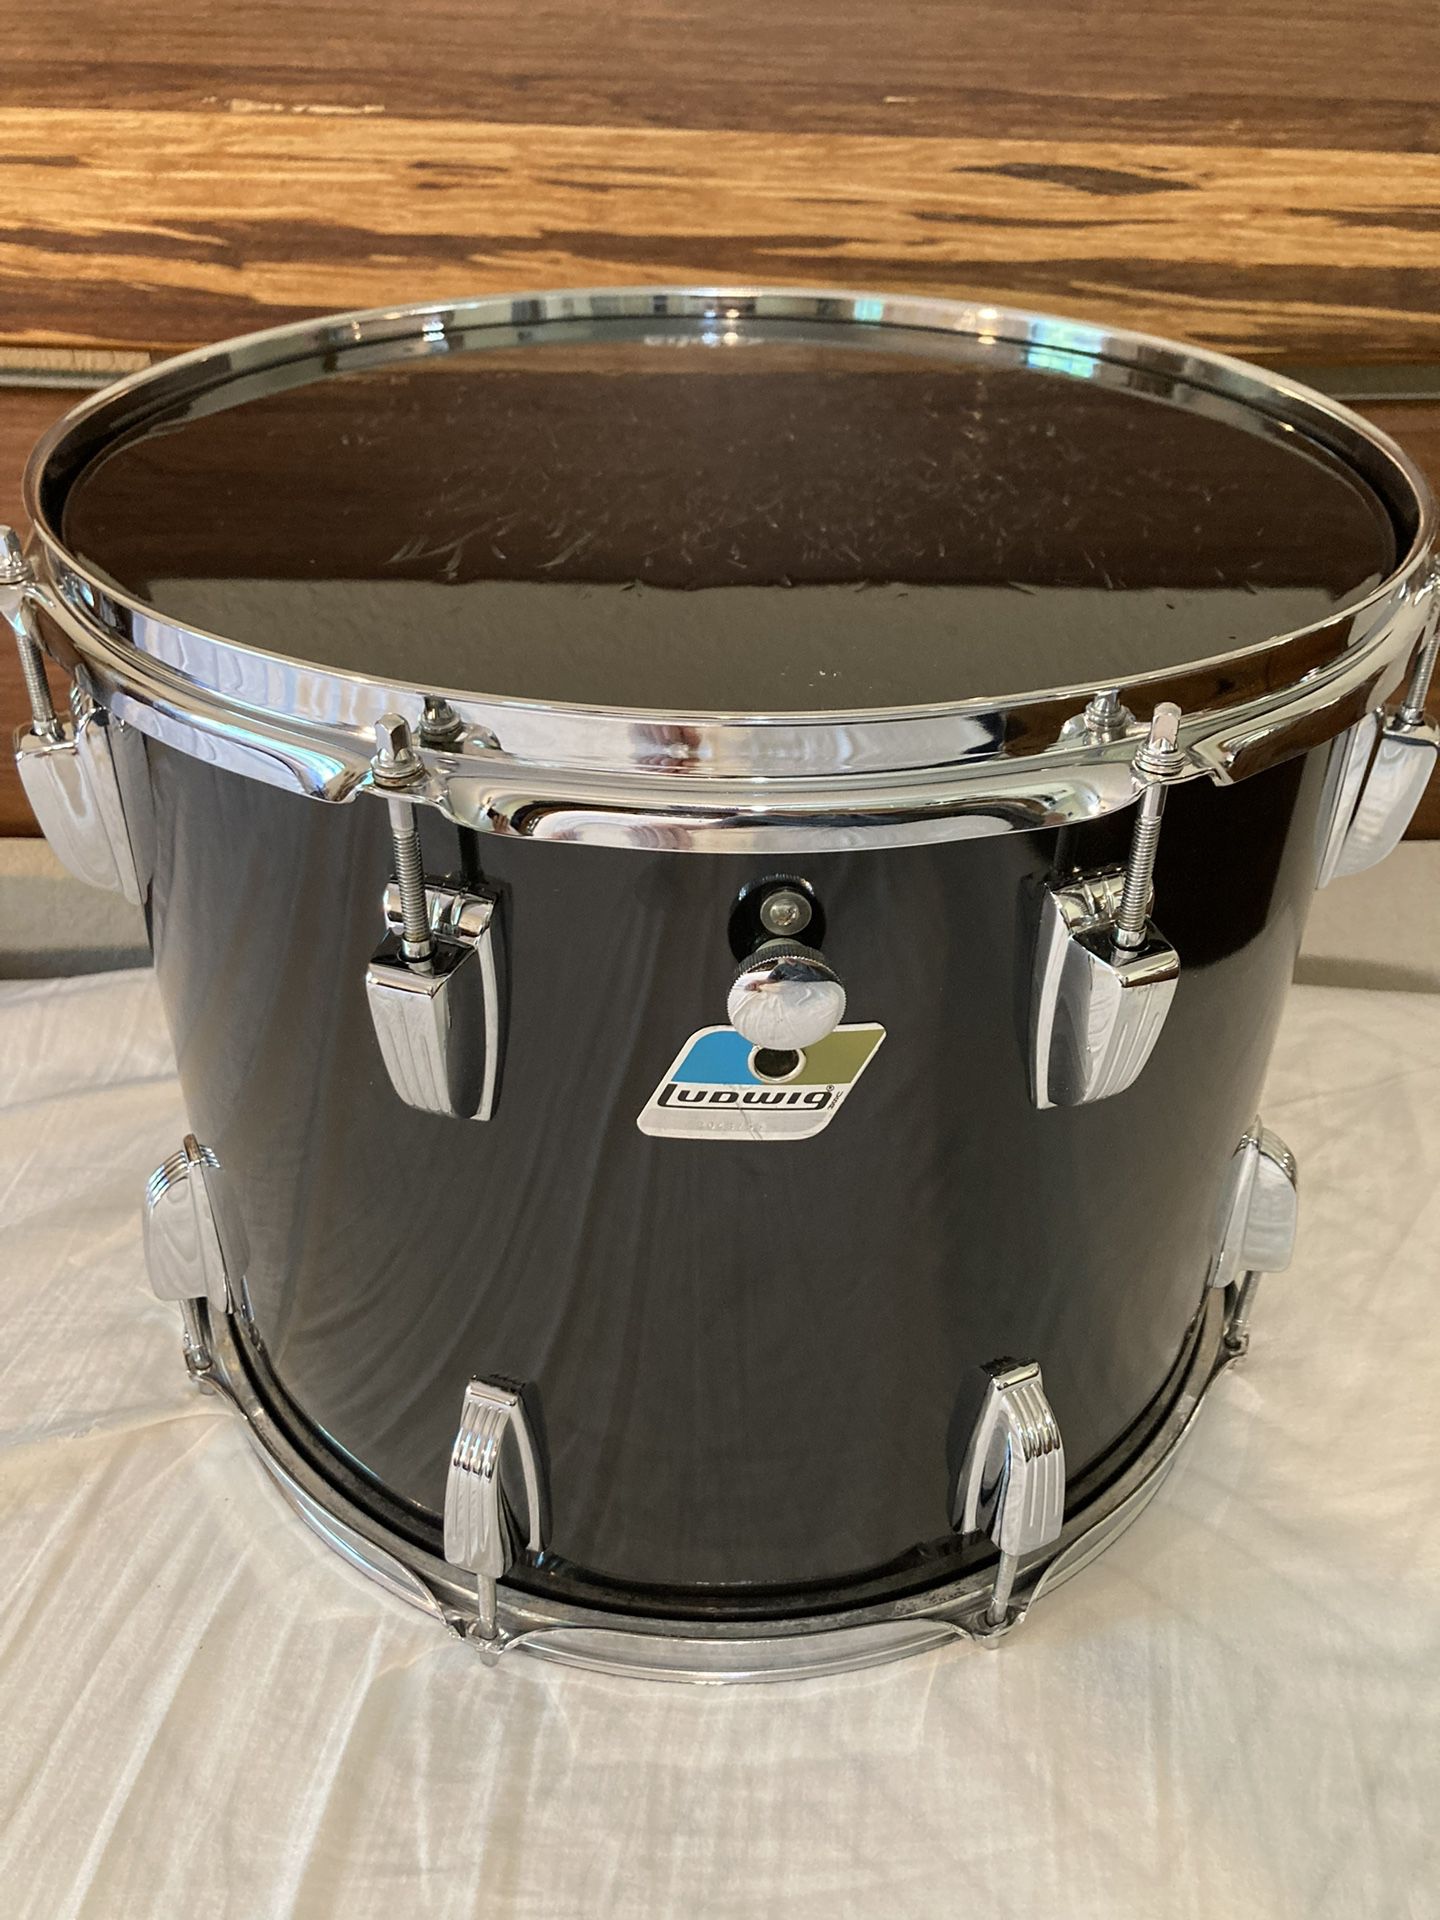 1982 Ludwig USA B/O Badge 12 x 15 Black Cortex Tom Drum Vintage Modular Mount. Drum is in nice condition with original bottom head. 6-ply clear maple 